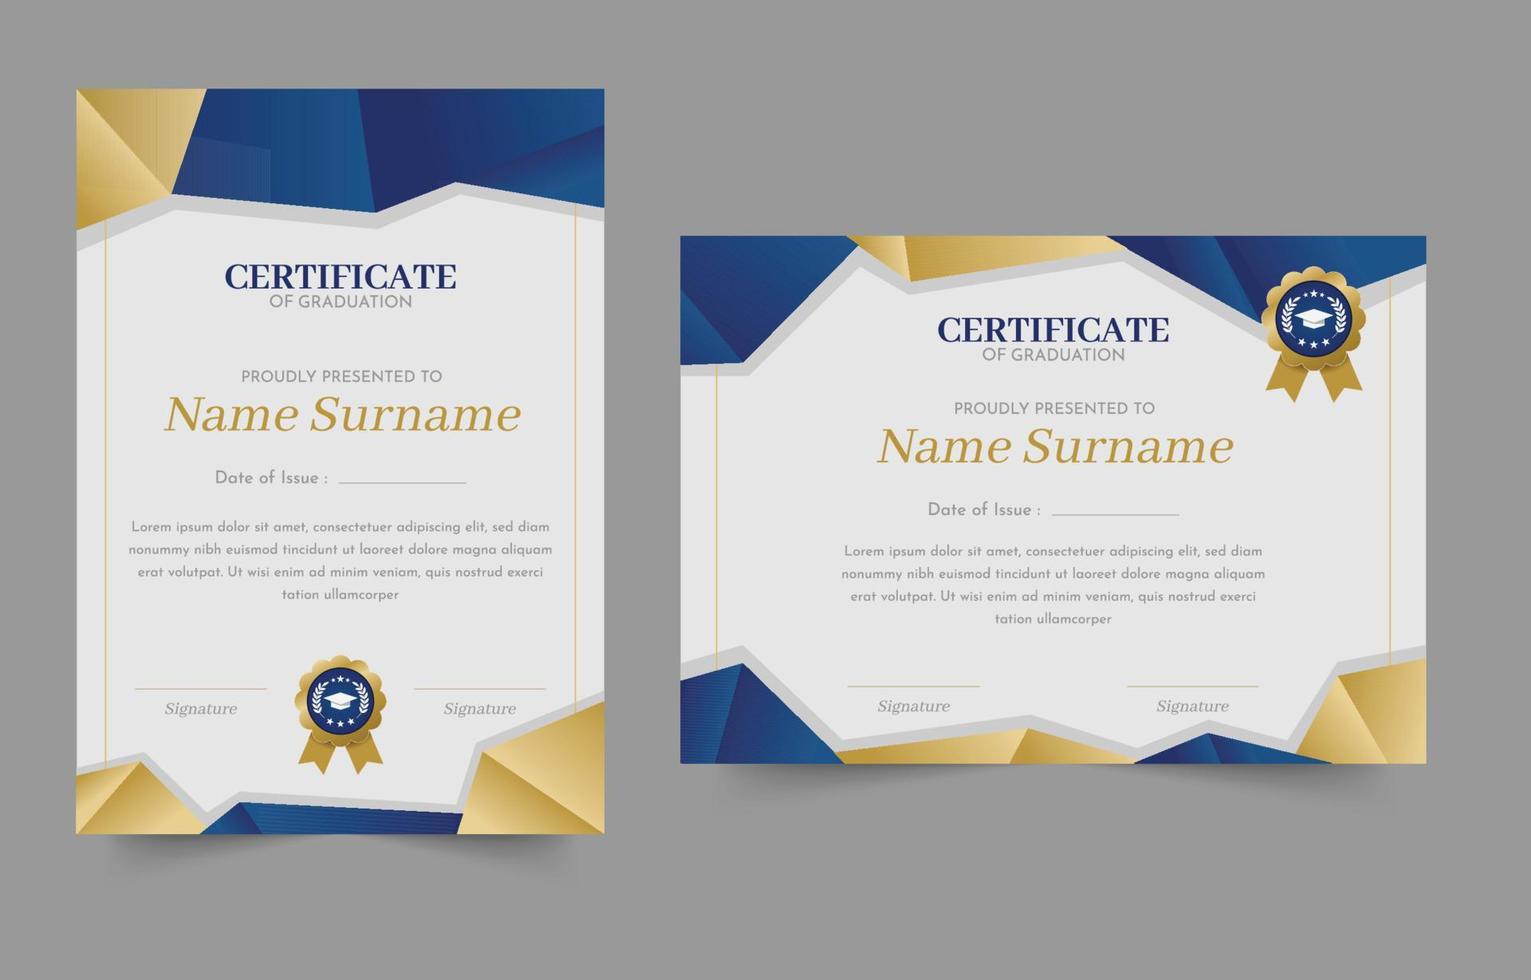 Education Certificate in Blue and Gold Background vector